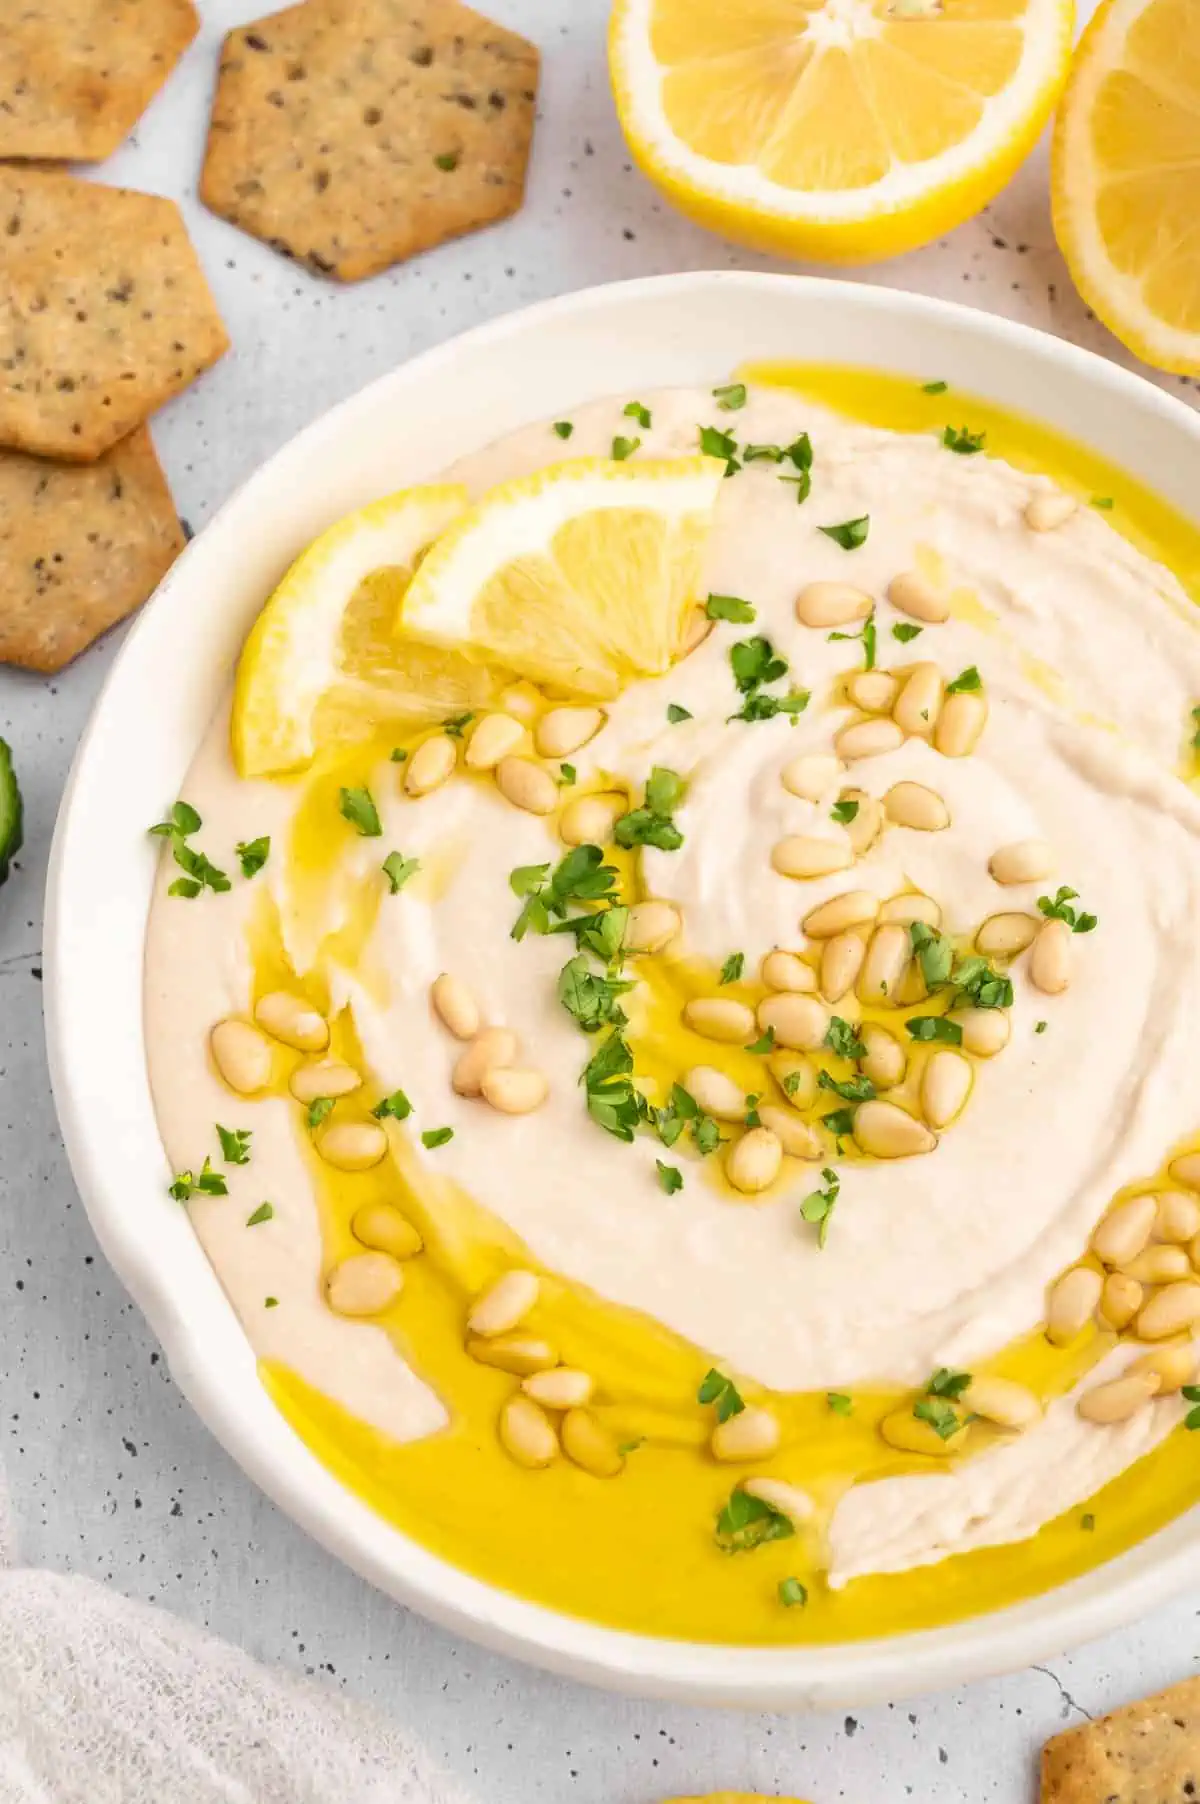 A bowl of white bean hummus, garnished with olive oil and pine nuts.